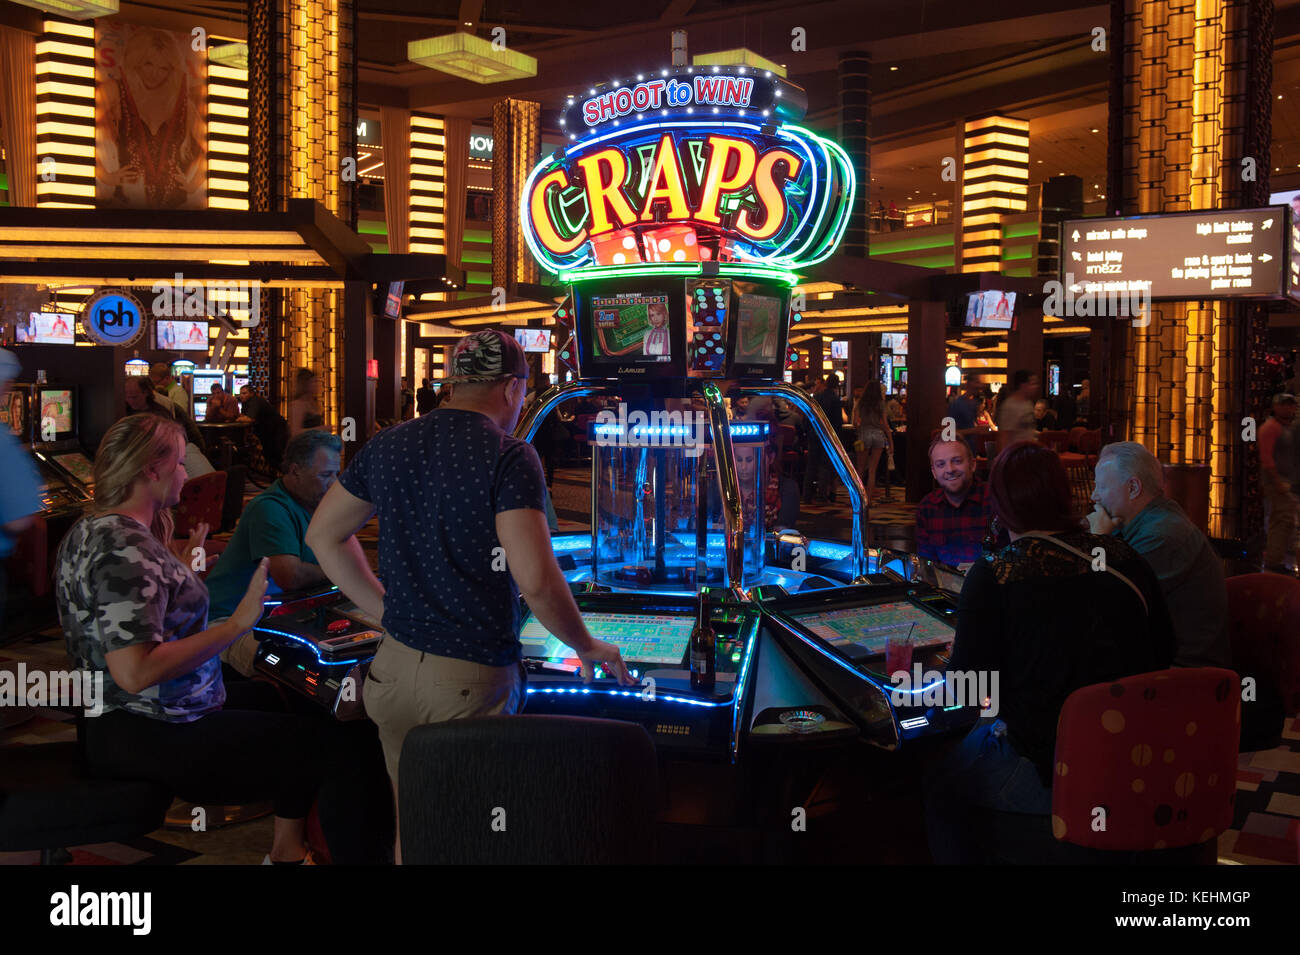 Gamblers playing Craps on a Shoot to Win machine, Planet Hollywood casino, Las Vegas, Nevada. Stock Photo